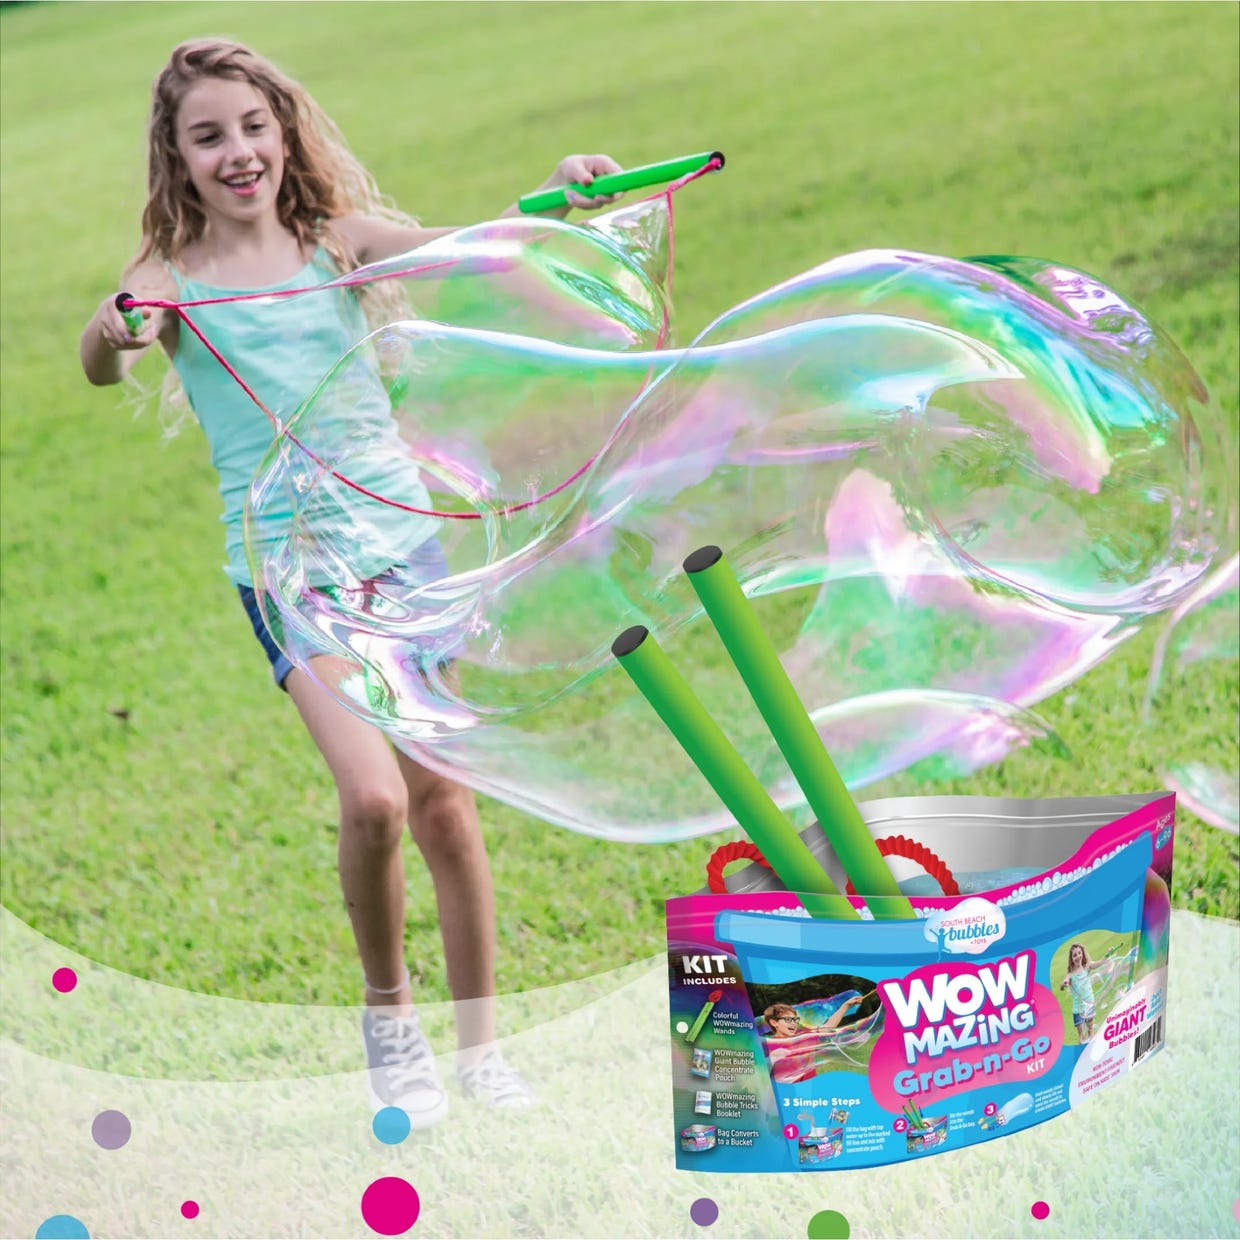 A girl is creating large bubbles using a bubble-making kit with wands and a solution.